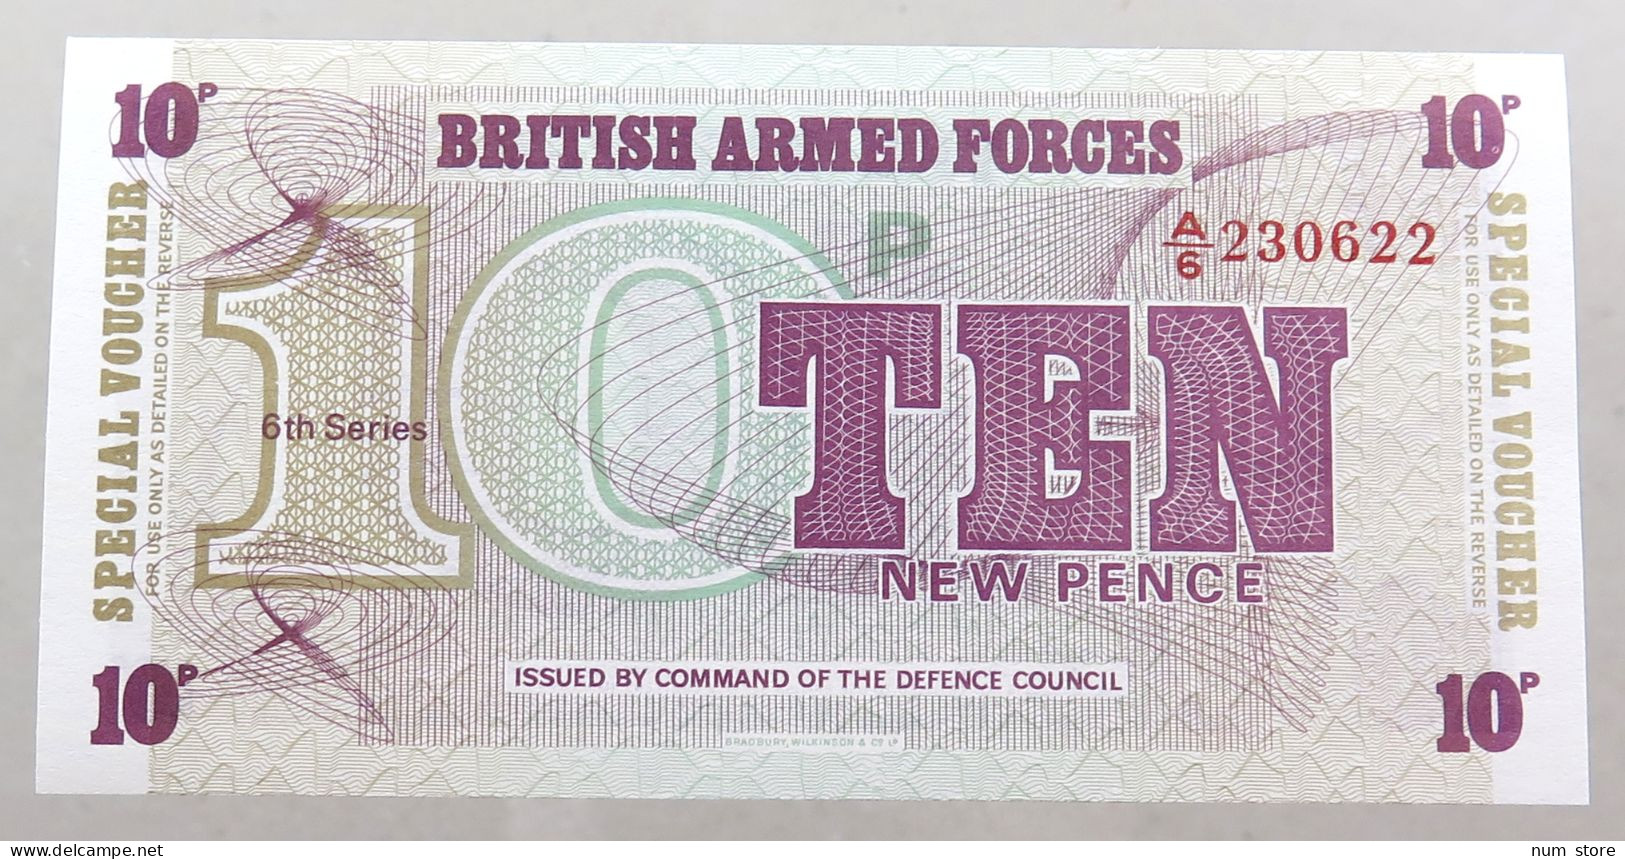 GREAT BRITAIN 10 PENCE BRITISH ARMED FORCES TOP #alb049 0147 - British Armed Forces & Special Vouchers